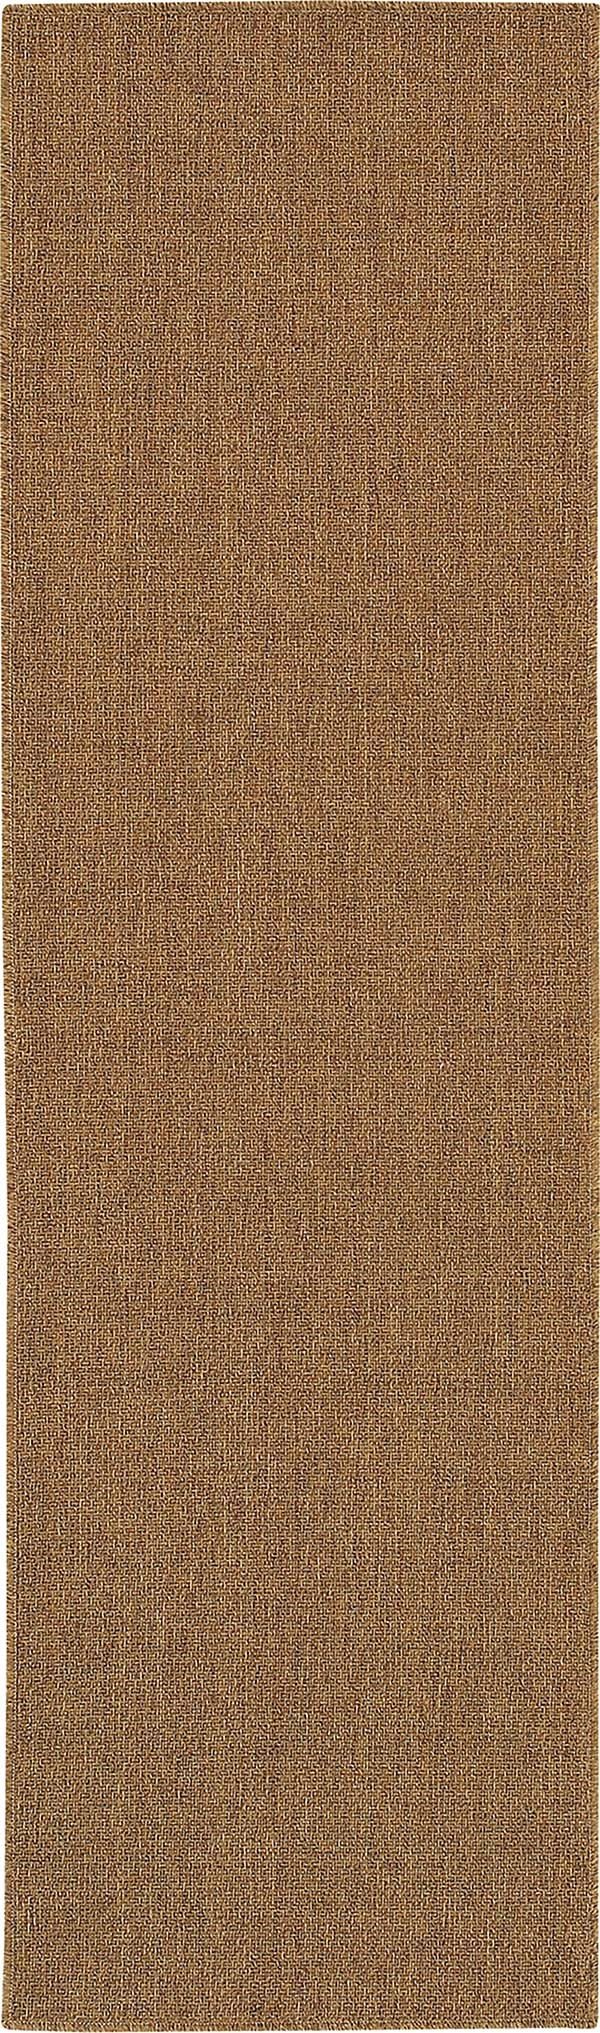 Karavia is a machine-woven construction in durable polypropylene. These rugs have the texture and natural coloration of real seagrass, but have the low maintenance properties of synthetic fibers.